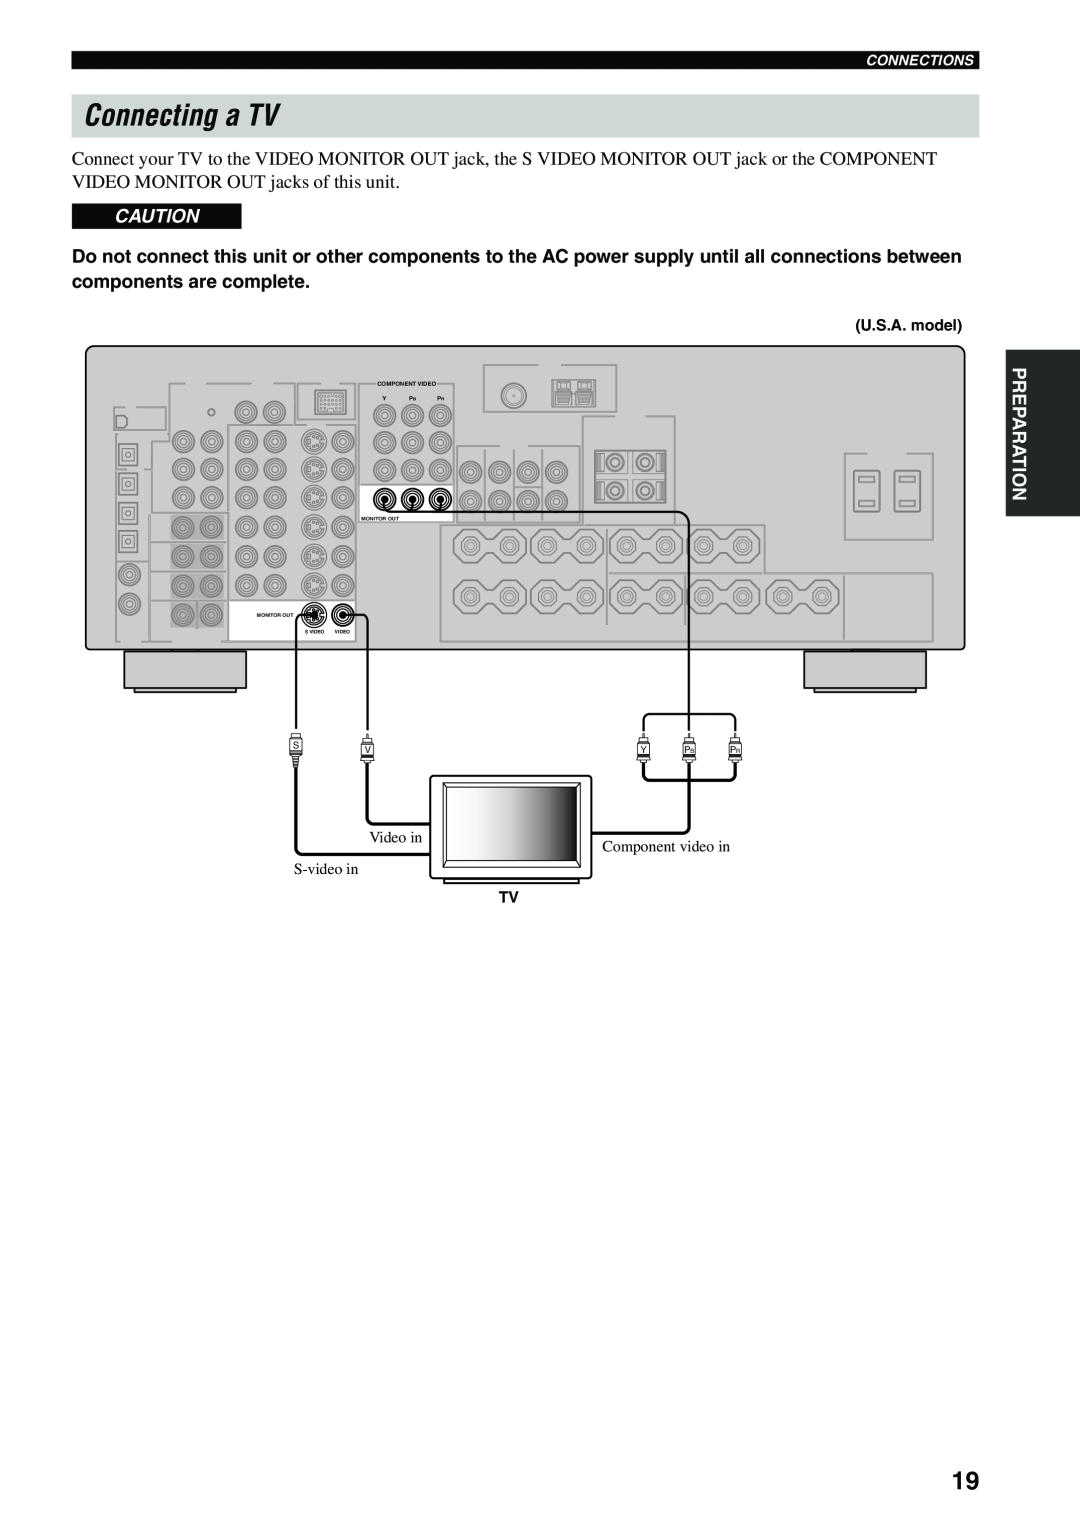 Yamaha HTR-5960 owner manual Connecting a TV, U.S.A. model, Connections, Y Pbpr, Component Video Y Pb Pr 